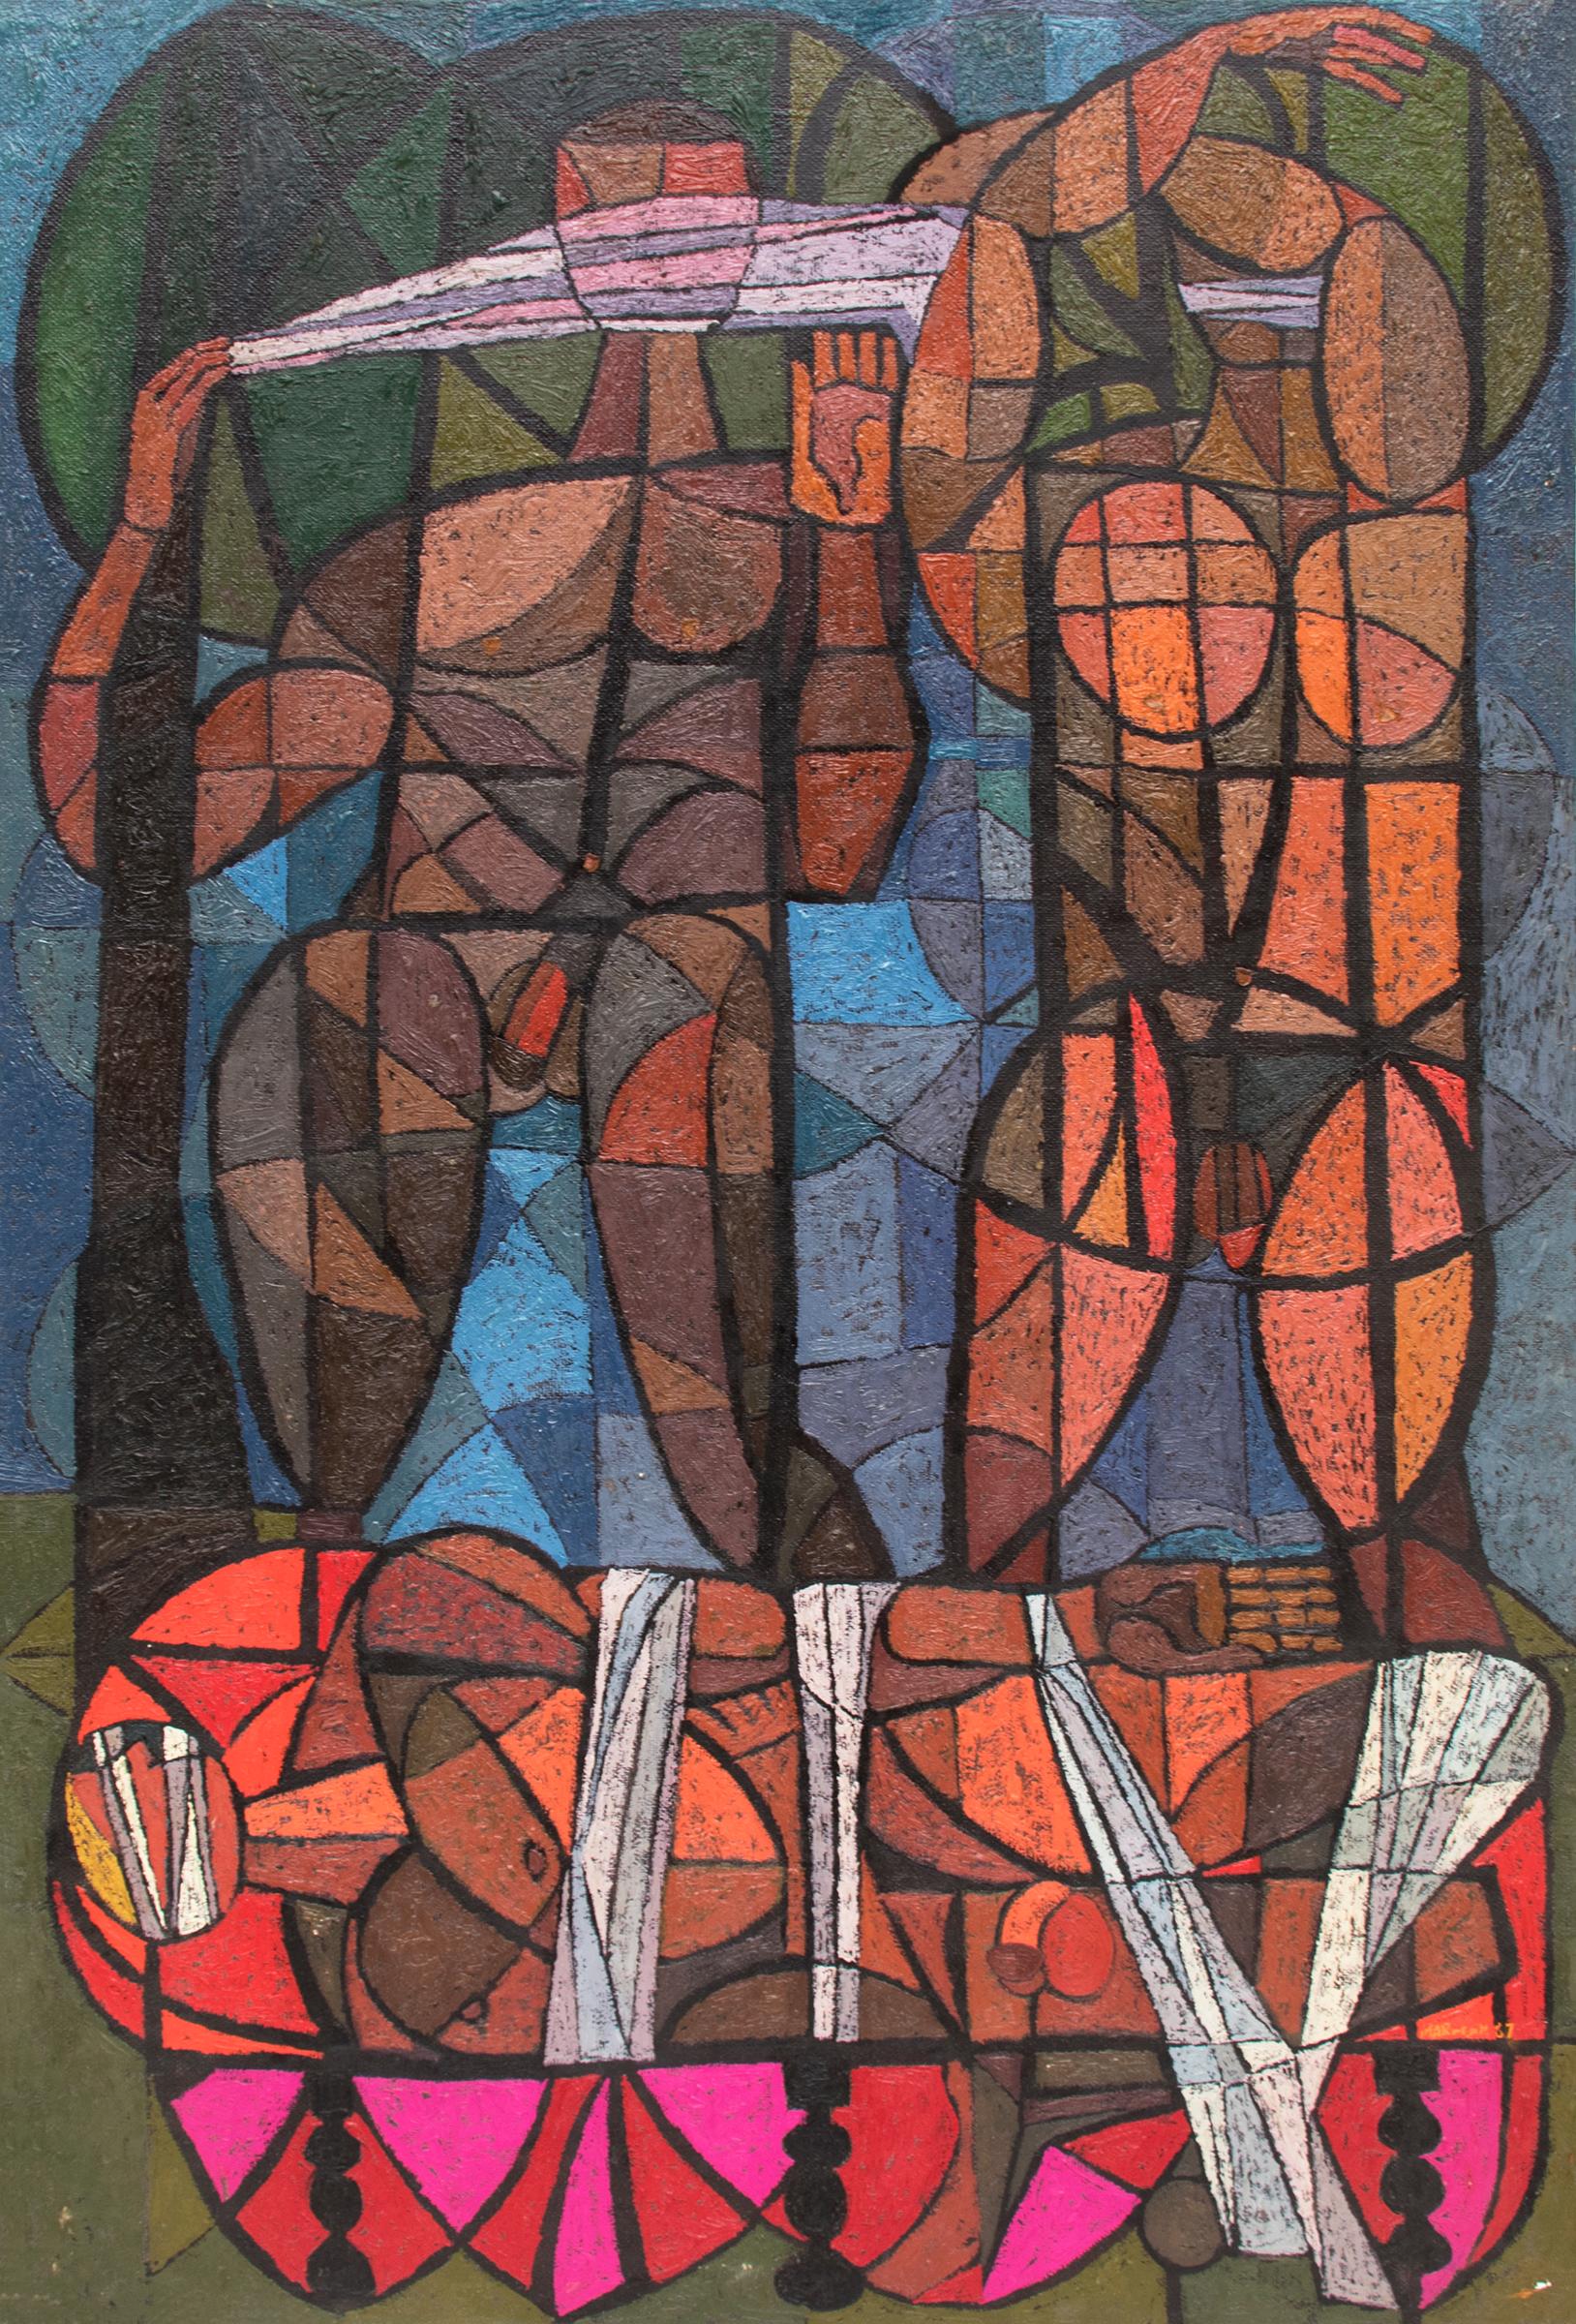 Edward Marecak Nude Painting - The Death of Gilgamesh (Abstract/Cubist Style Painting with Male Nude Figures)